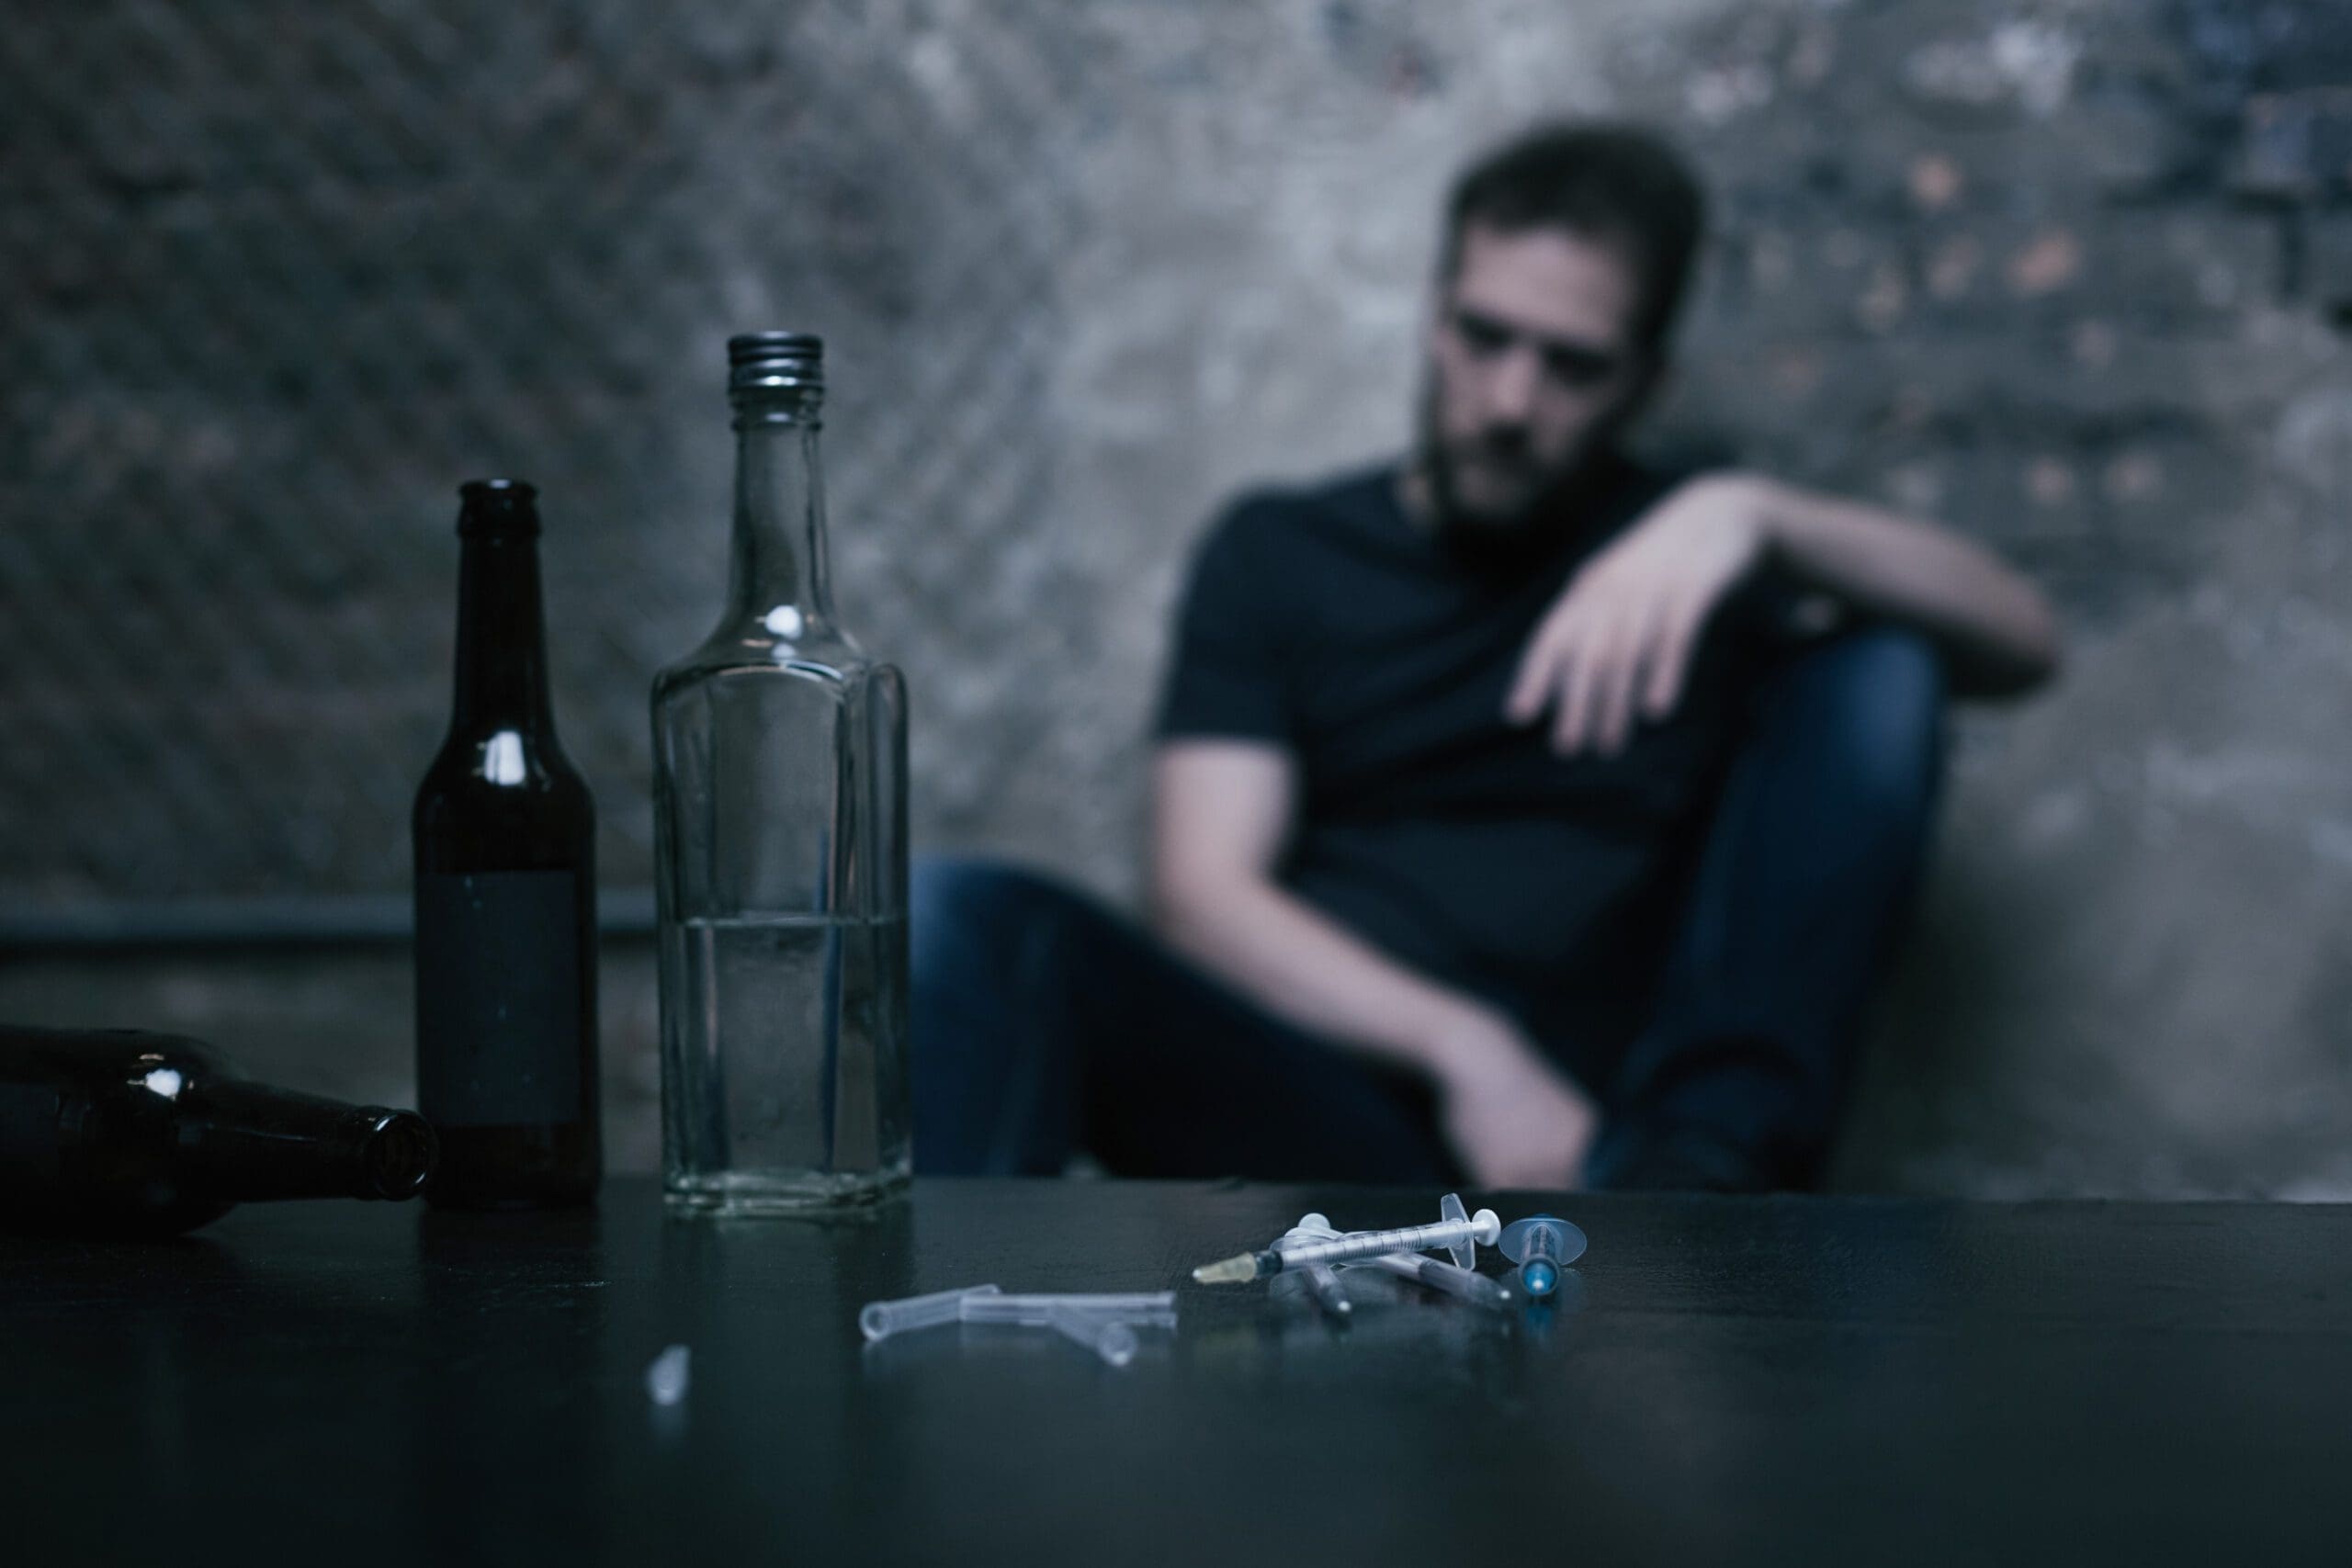 A man appears sitting in the background, looking contemplative, with empty bottles and syringes in the foreground.